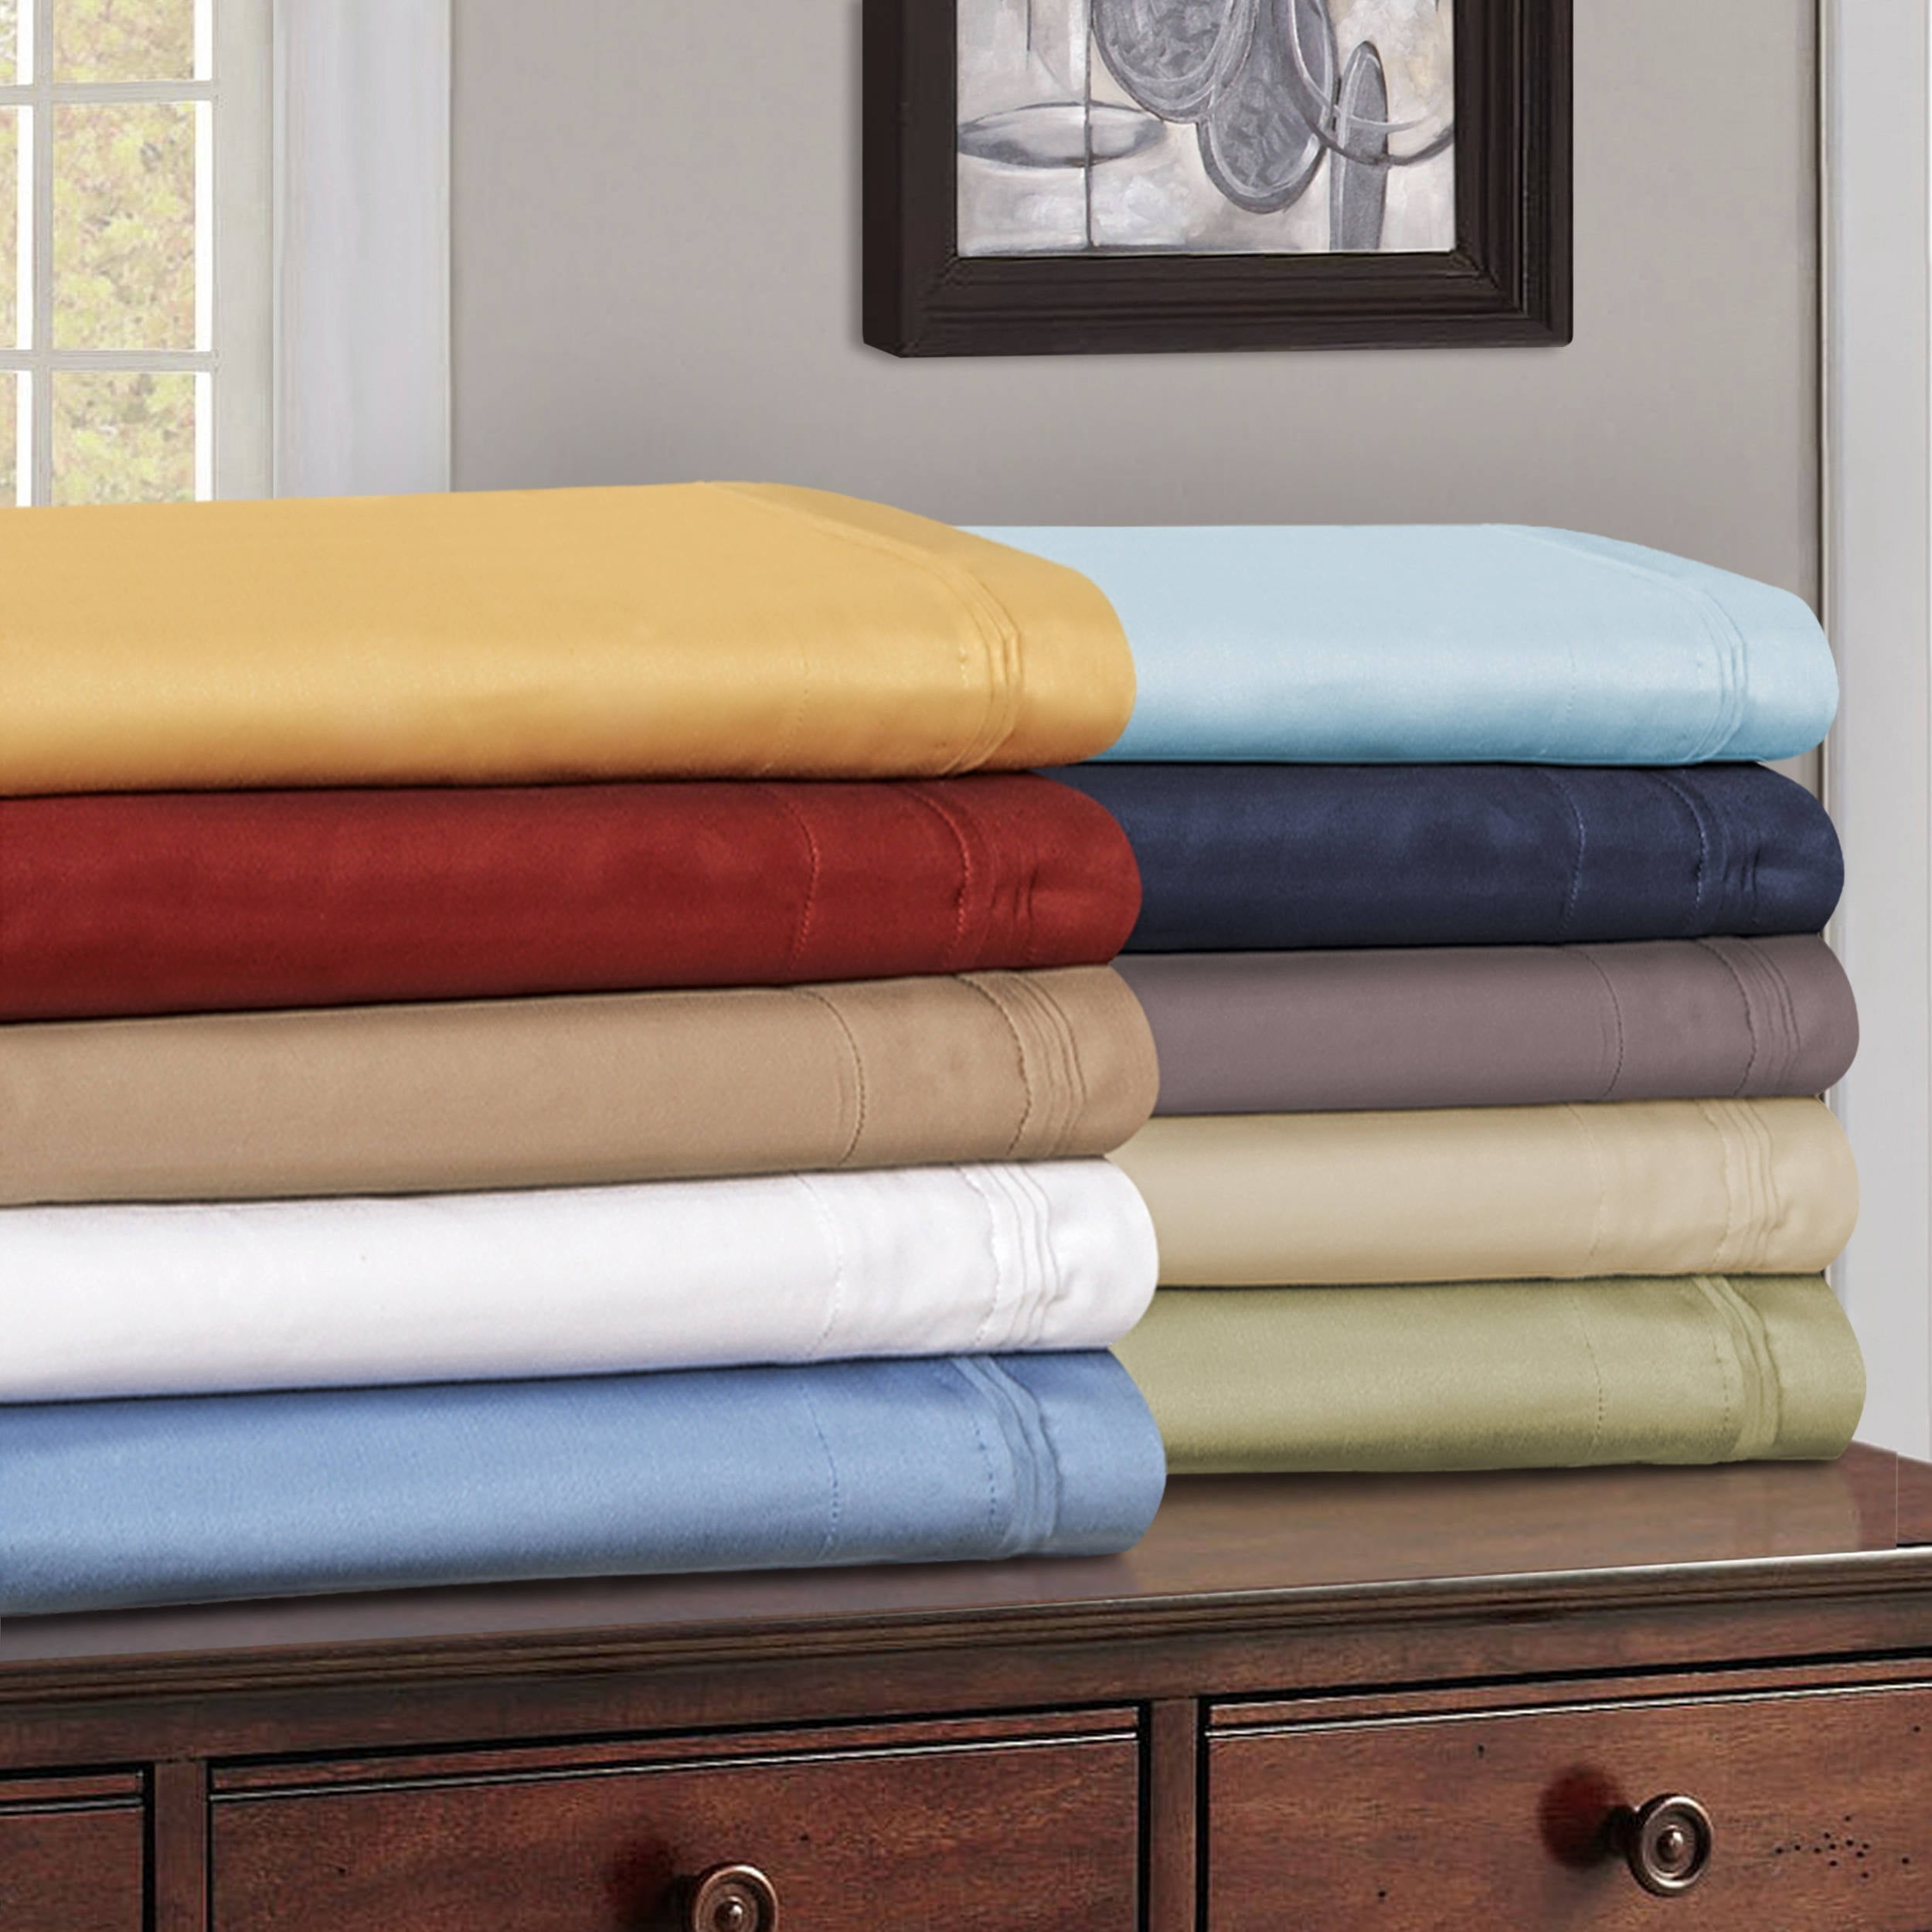 6 PCs Sheet Set Egyptian Cotton 1000 Thread Count Solid Colors Olympic Queen 